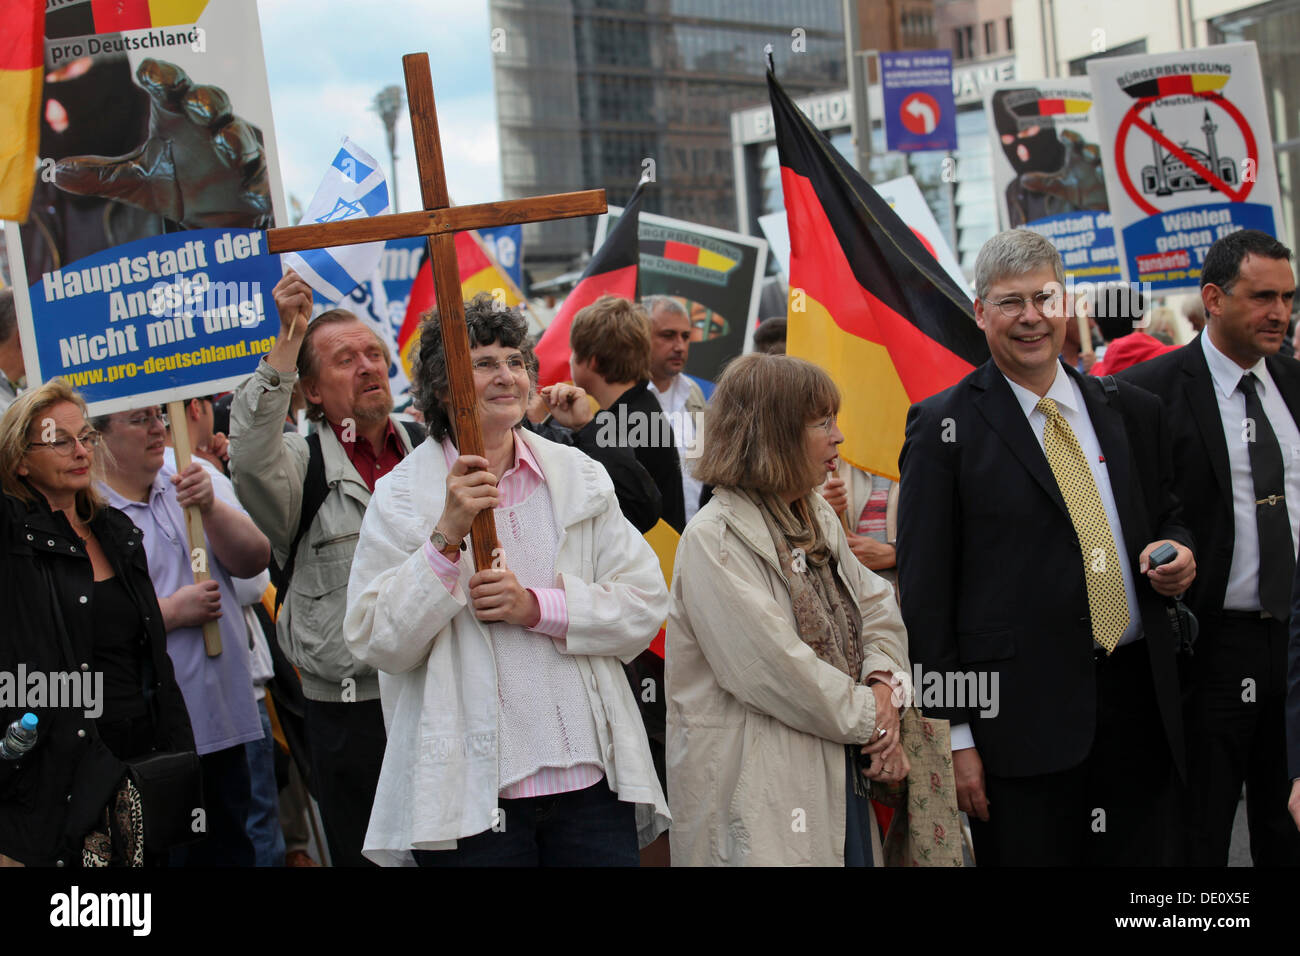 From rigth to left: Lars Seidensticker, federal whip and Manfred Rouhs, federal chairman of the Pro Germany Citizens' Movement, Stock Photo